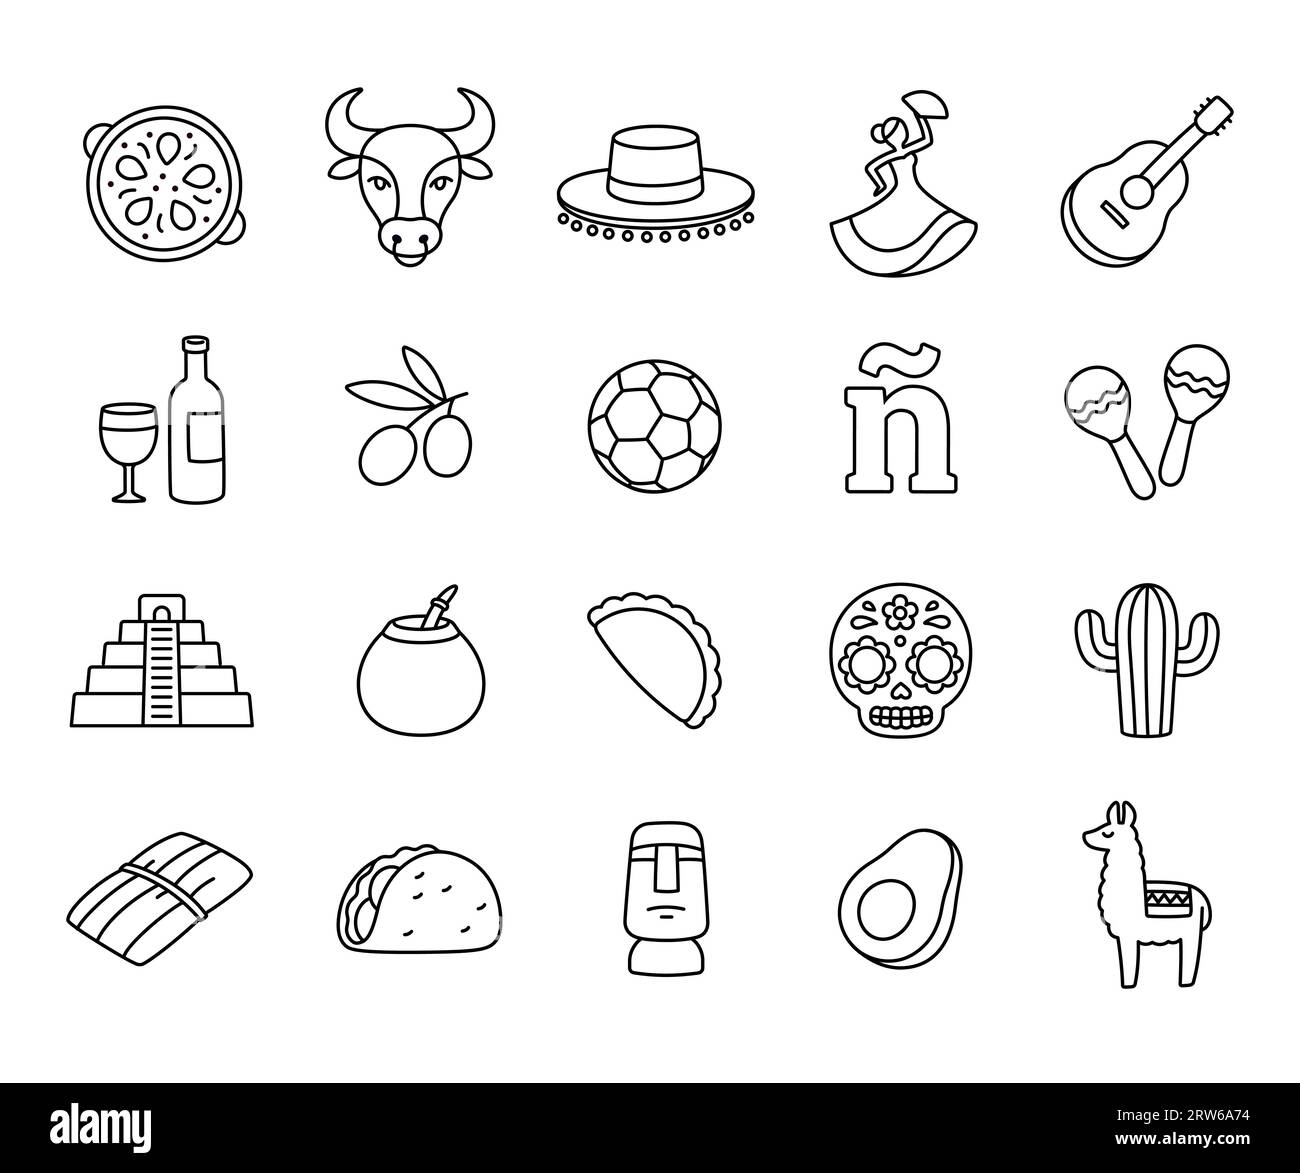 Spanish language and Hispanic cultures icons, hand drawn doodle style. Spain and Latin America symbols. Vector line art illustration. Stock Vector